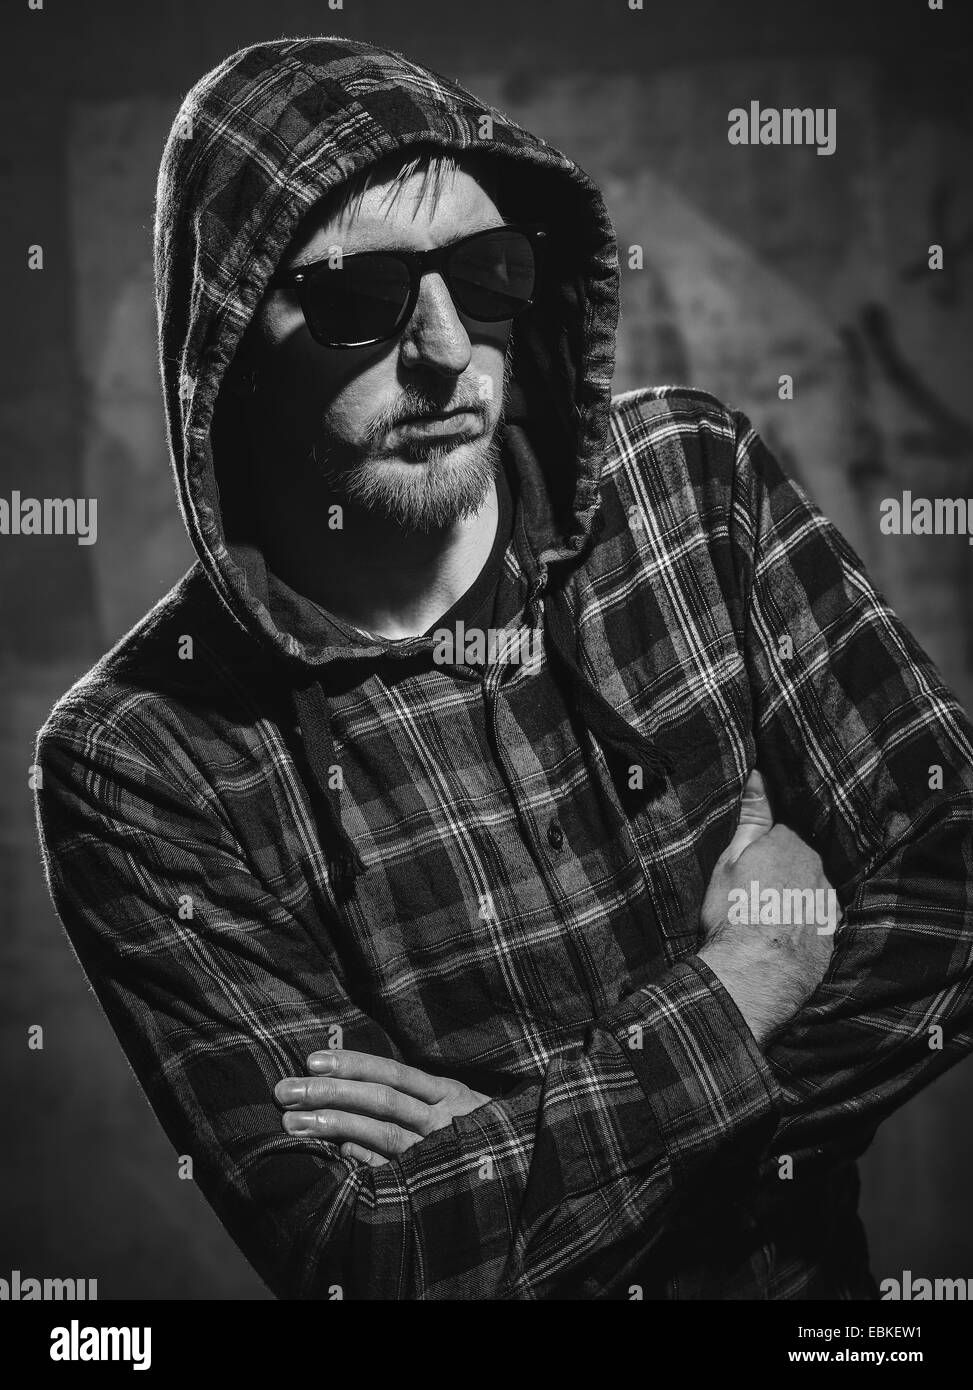 Handsome young man wearing  a checked shirt and a sunglasses, concrete wall on background - black and white image Stock Photo